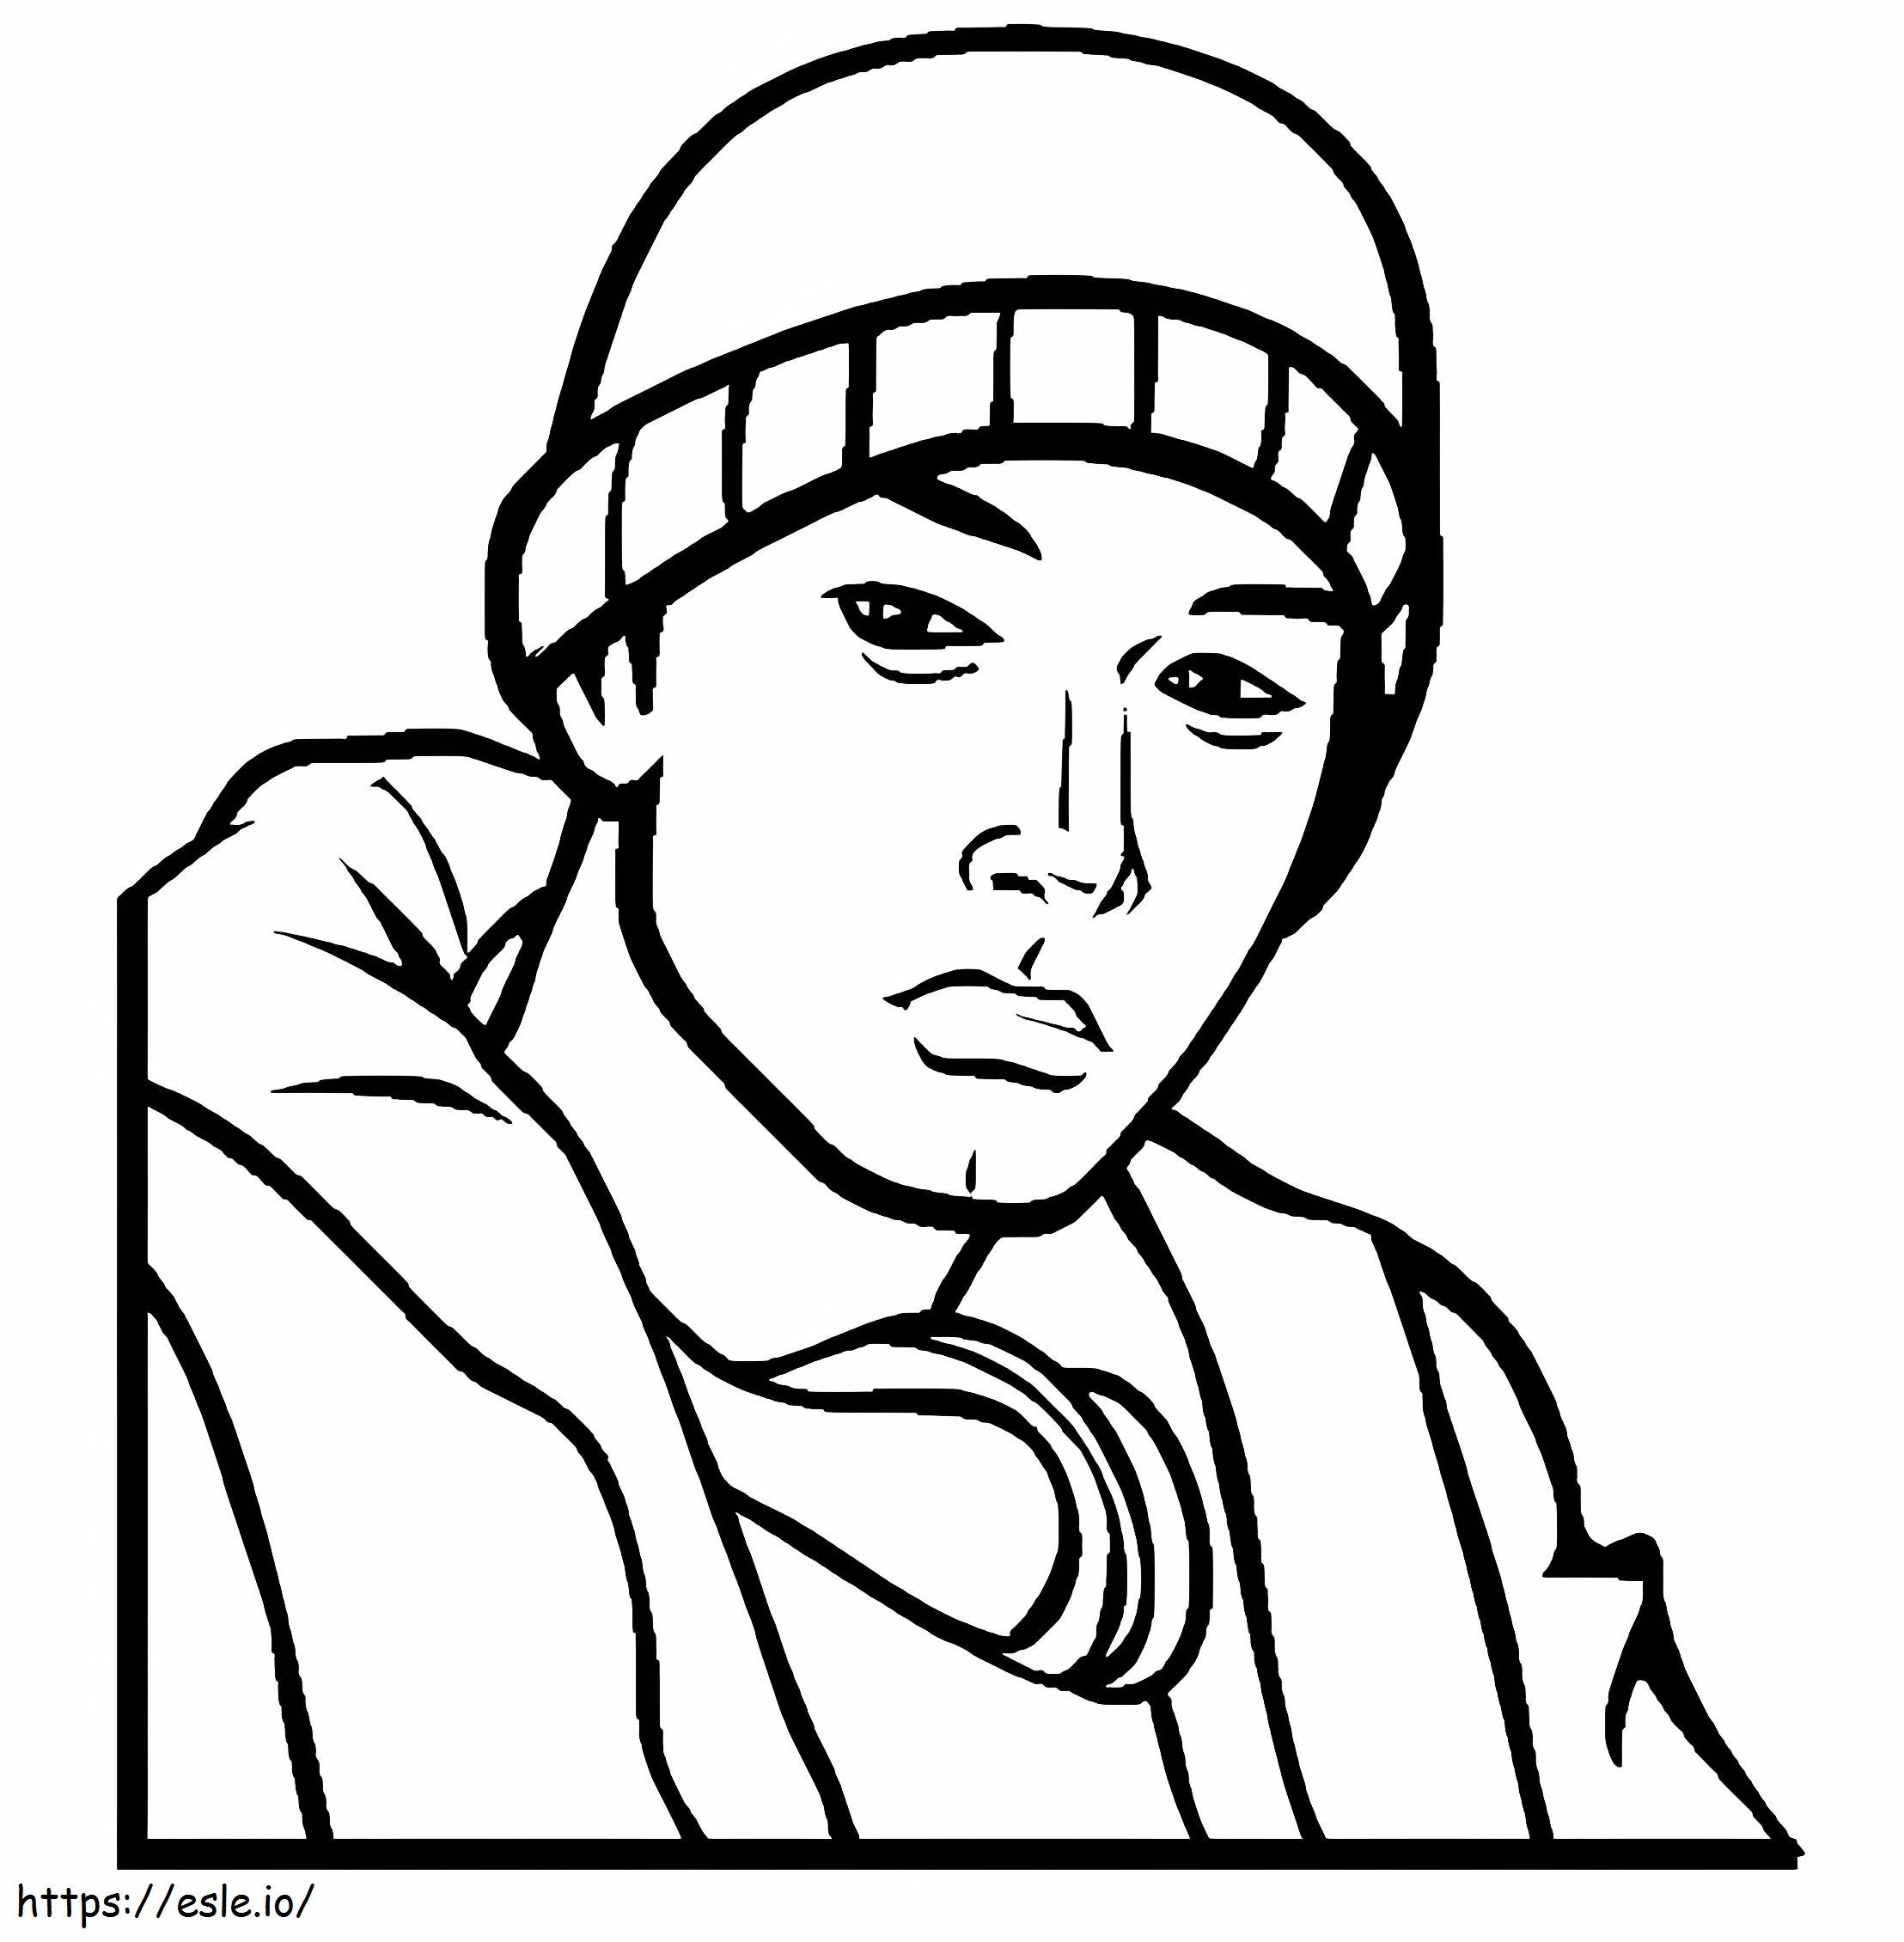 1541555746 coloring page